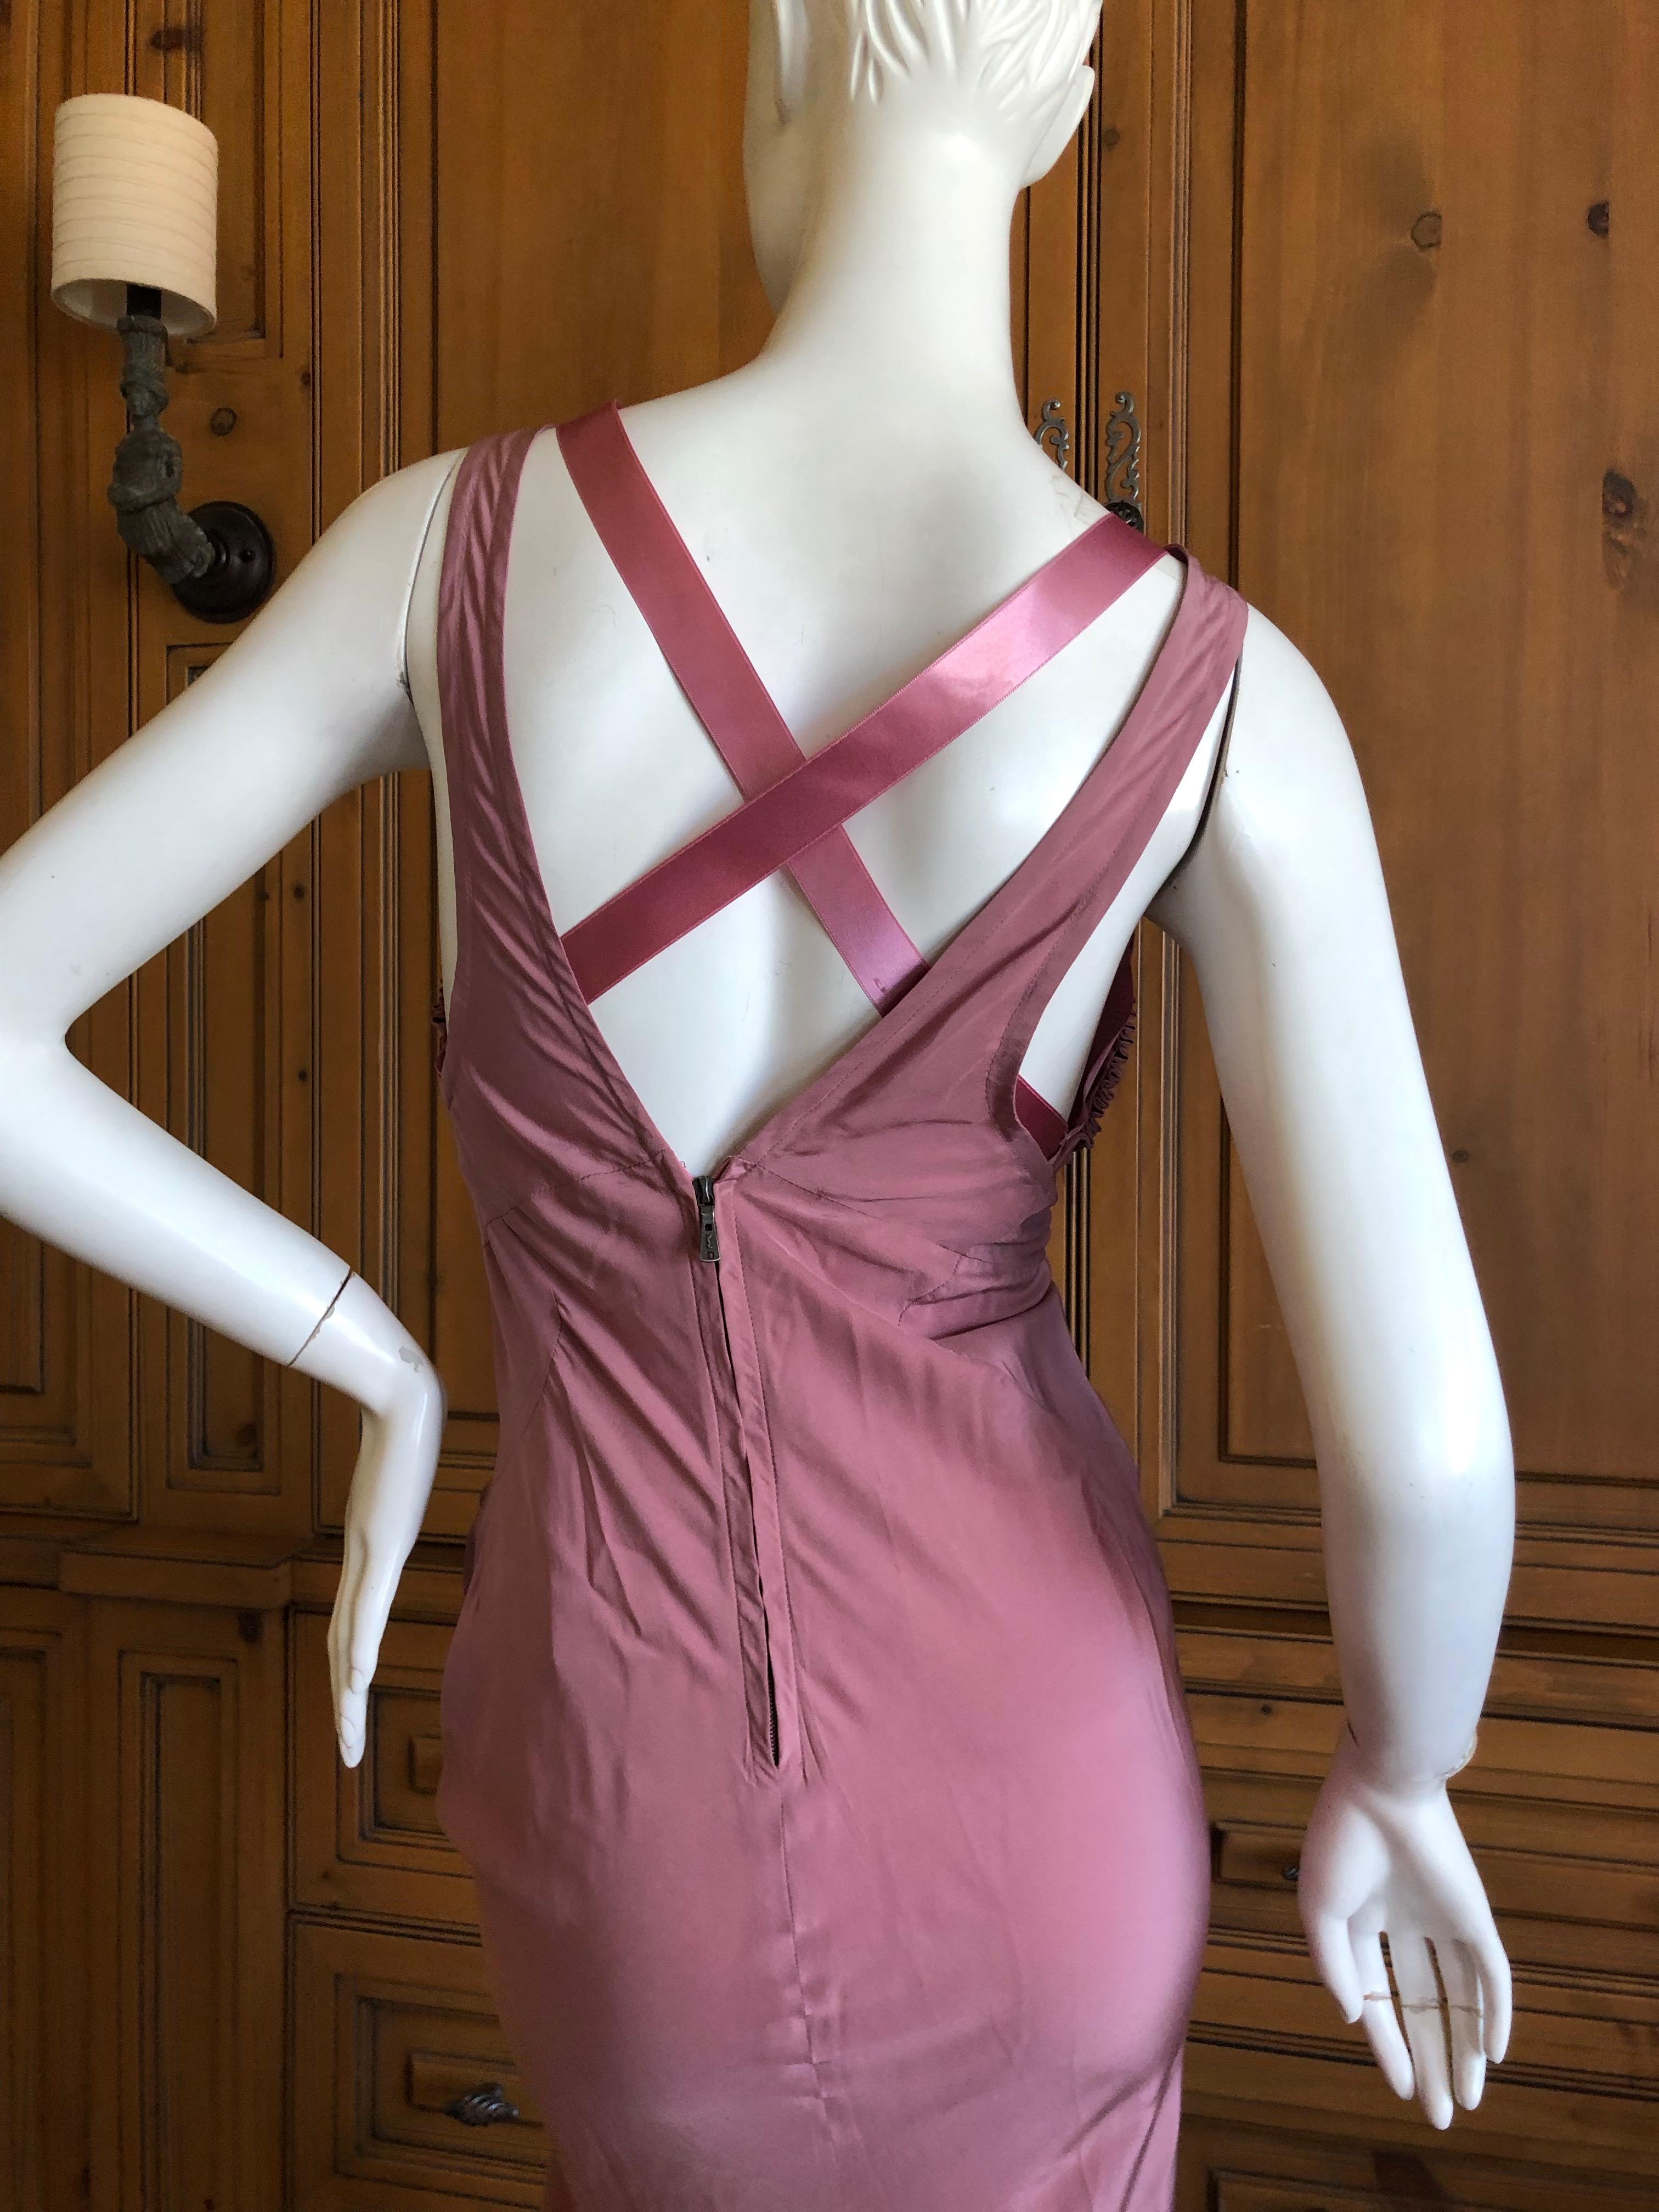 Yves Saint Laurent Tom Ford Mauve Pink Racer Back Evening Dress In Excellent Condition For Sale In Cloverdale, CA